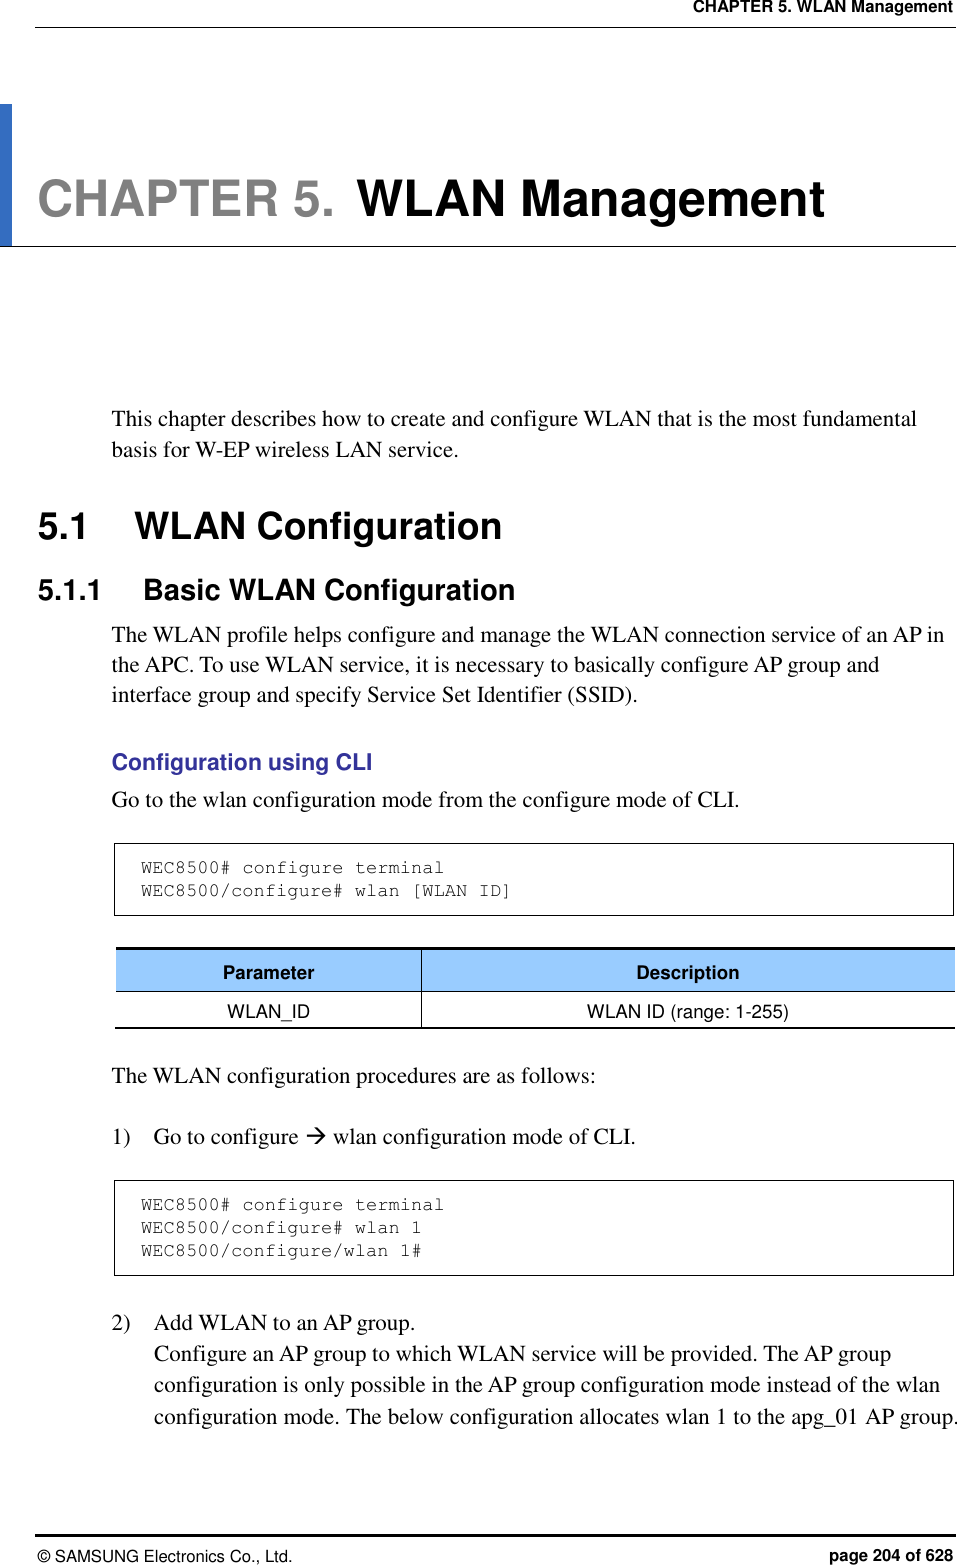 CHAPTER 5. WLAN Management ©  SAMSUNG Electronics Co., Ltd.  page 204 of 628 CHAPTER 5. WLAN Management      This chapter describes how to create and configure WLAN that is the most fundamental basis for W-EP wireless LAN service.    5.1  WLAN Configuration 5.1.1  Basic WLAN Configuration The WLAN profile helps configure and manage the WLAN connection service of an AP in the APC. To use WLAN service, it is necessary to basically configure AP group and interface group and specify Service Set Identifier (SSID).  Configuration using CLI Go to the wlan configuration mode from the configure mode of CLI.  WEC8500# configure terminal WEC8500/configure# wlan [WLAN ID]  Parameter Description WLAN_ID WLAN ID (range: 1-255)  The WLAN configuration procedures are as follows:  1)    Go to configure  wlan configuration mode of CLI.  WEC8500# configure terminal WEC8500/configure# wlan 1  WEC8500/configure/wlan 1#  2)    Add WLAN to an AP group. Configure an AP group to which WLAN service will be provided. The AP group configuration is only possible in the AP group configuration mode instead of the wlan configuration mode. The below configuration allocates wlan 1 to the apg_01 AP group.   